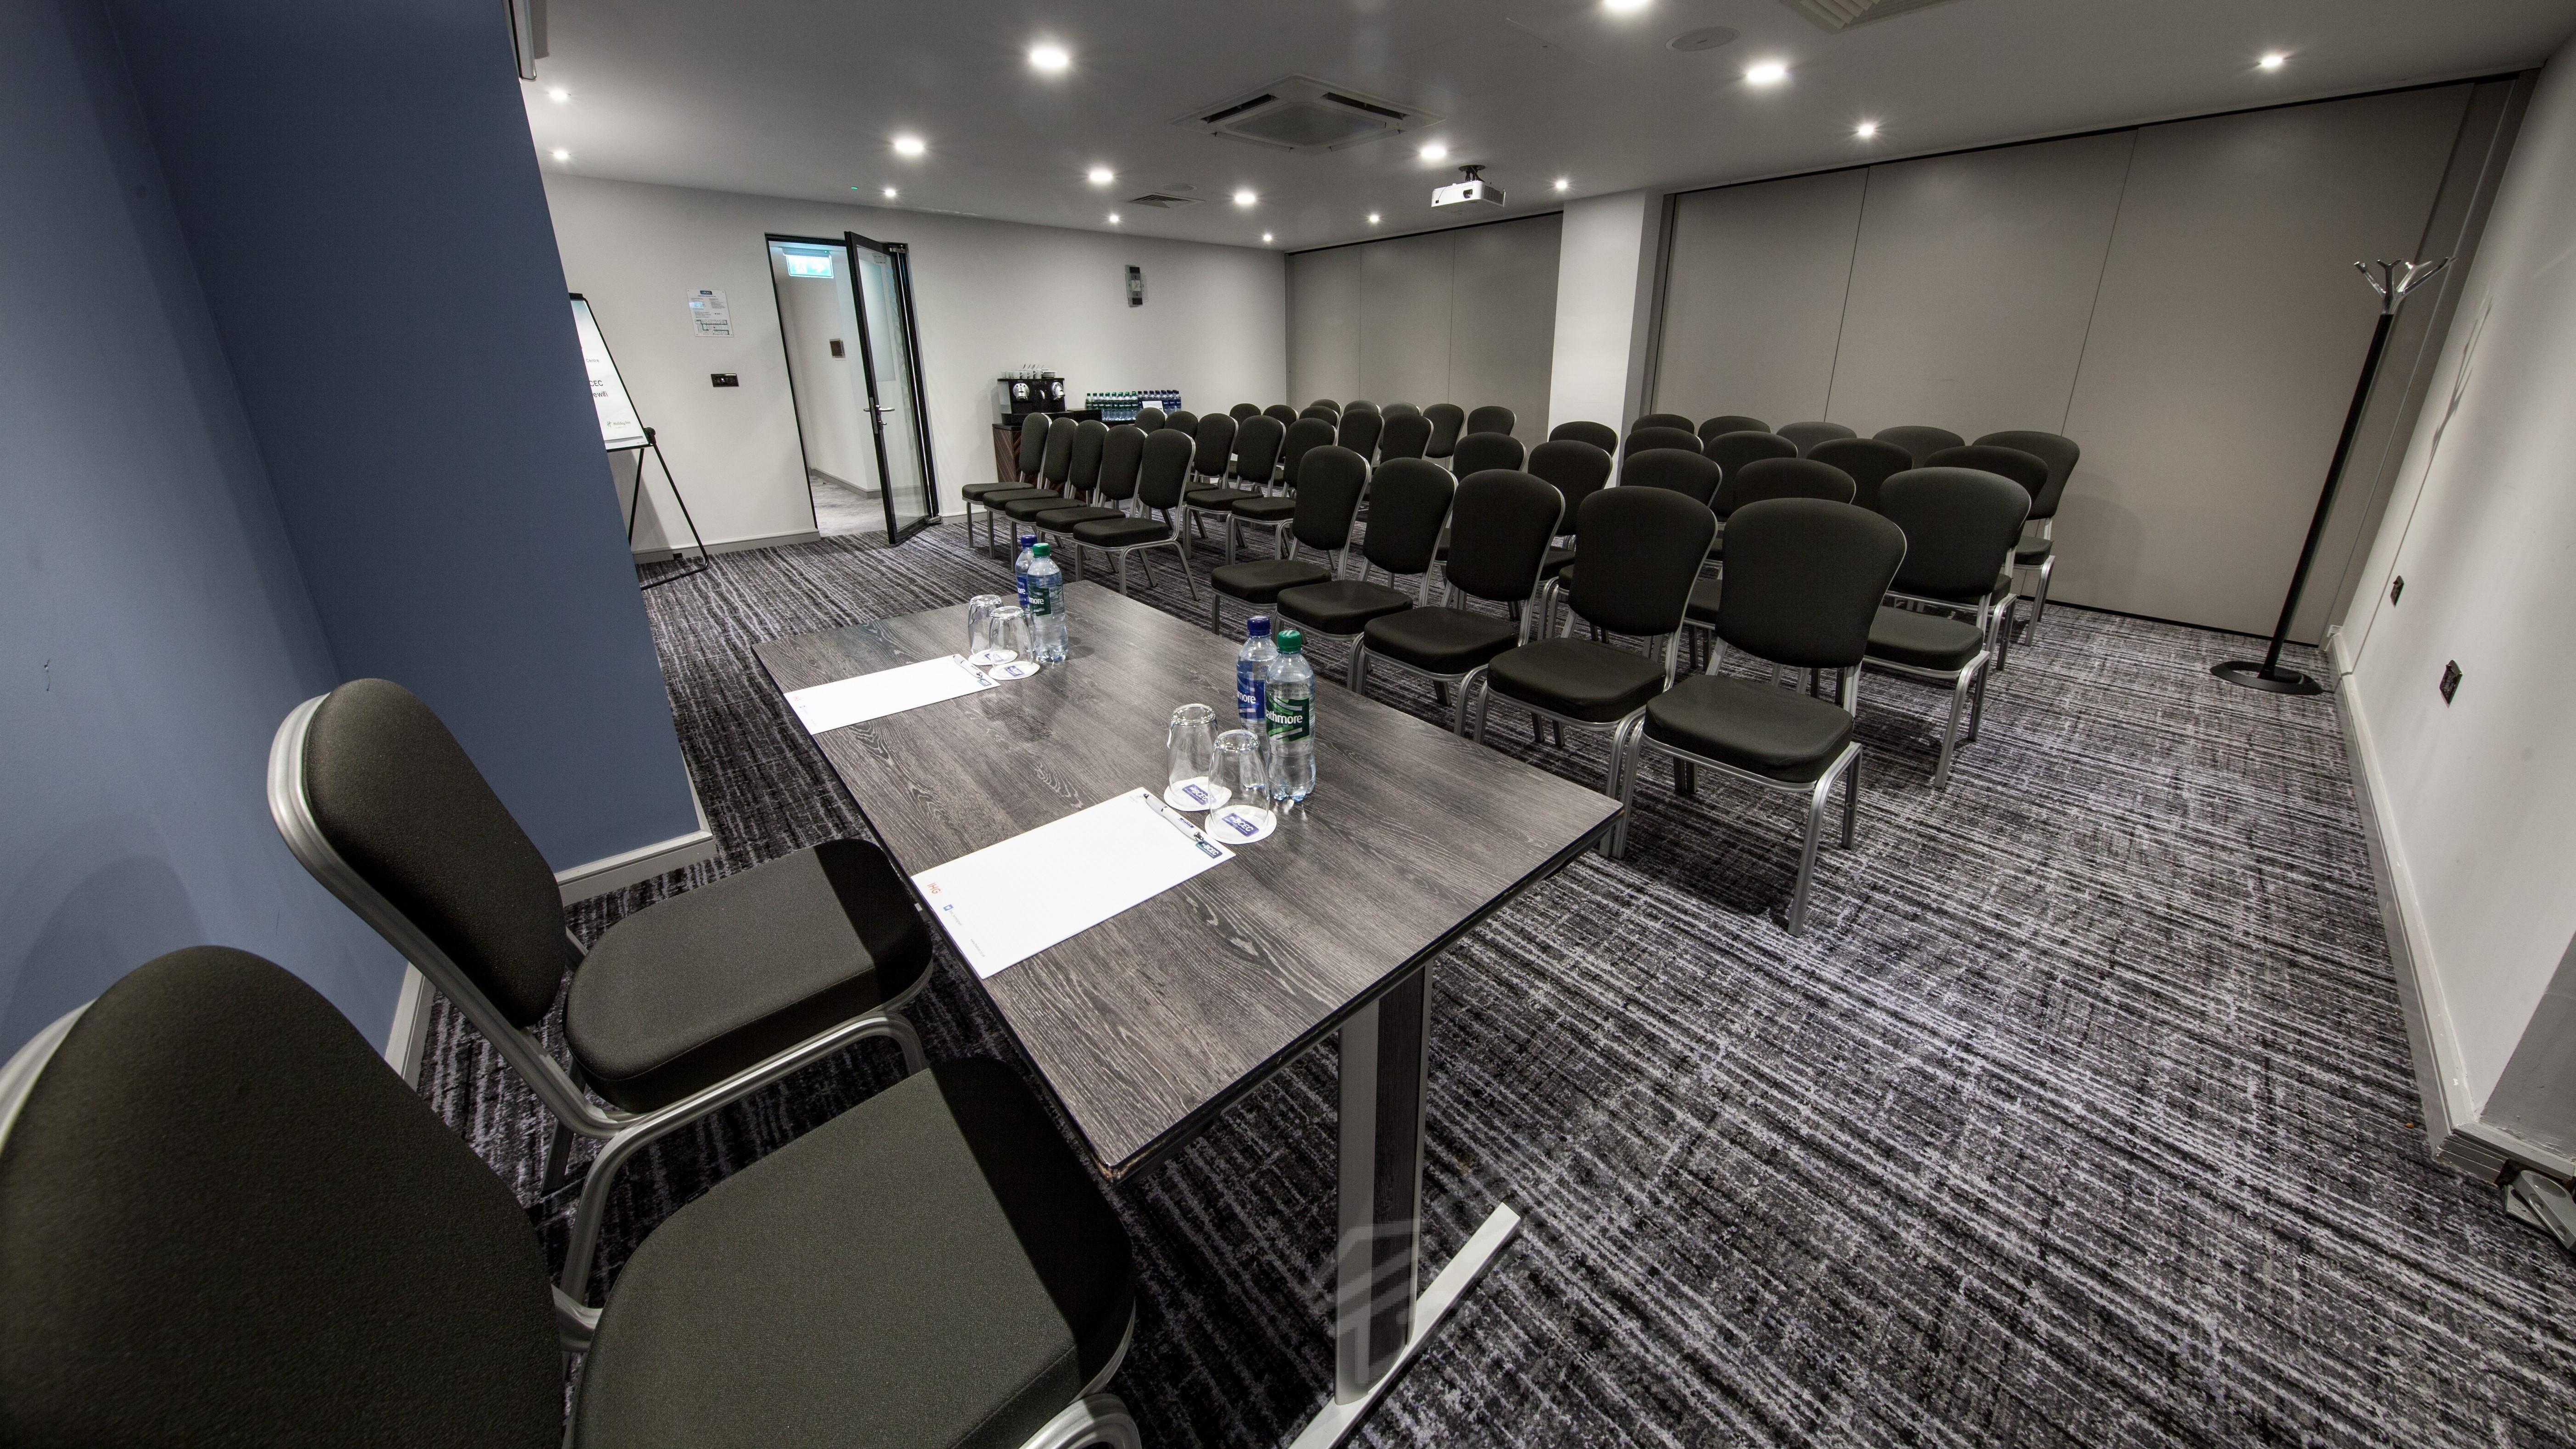 The Birmingham Conference and Events Centre at the Holiday Inn Birmingham City Centre17